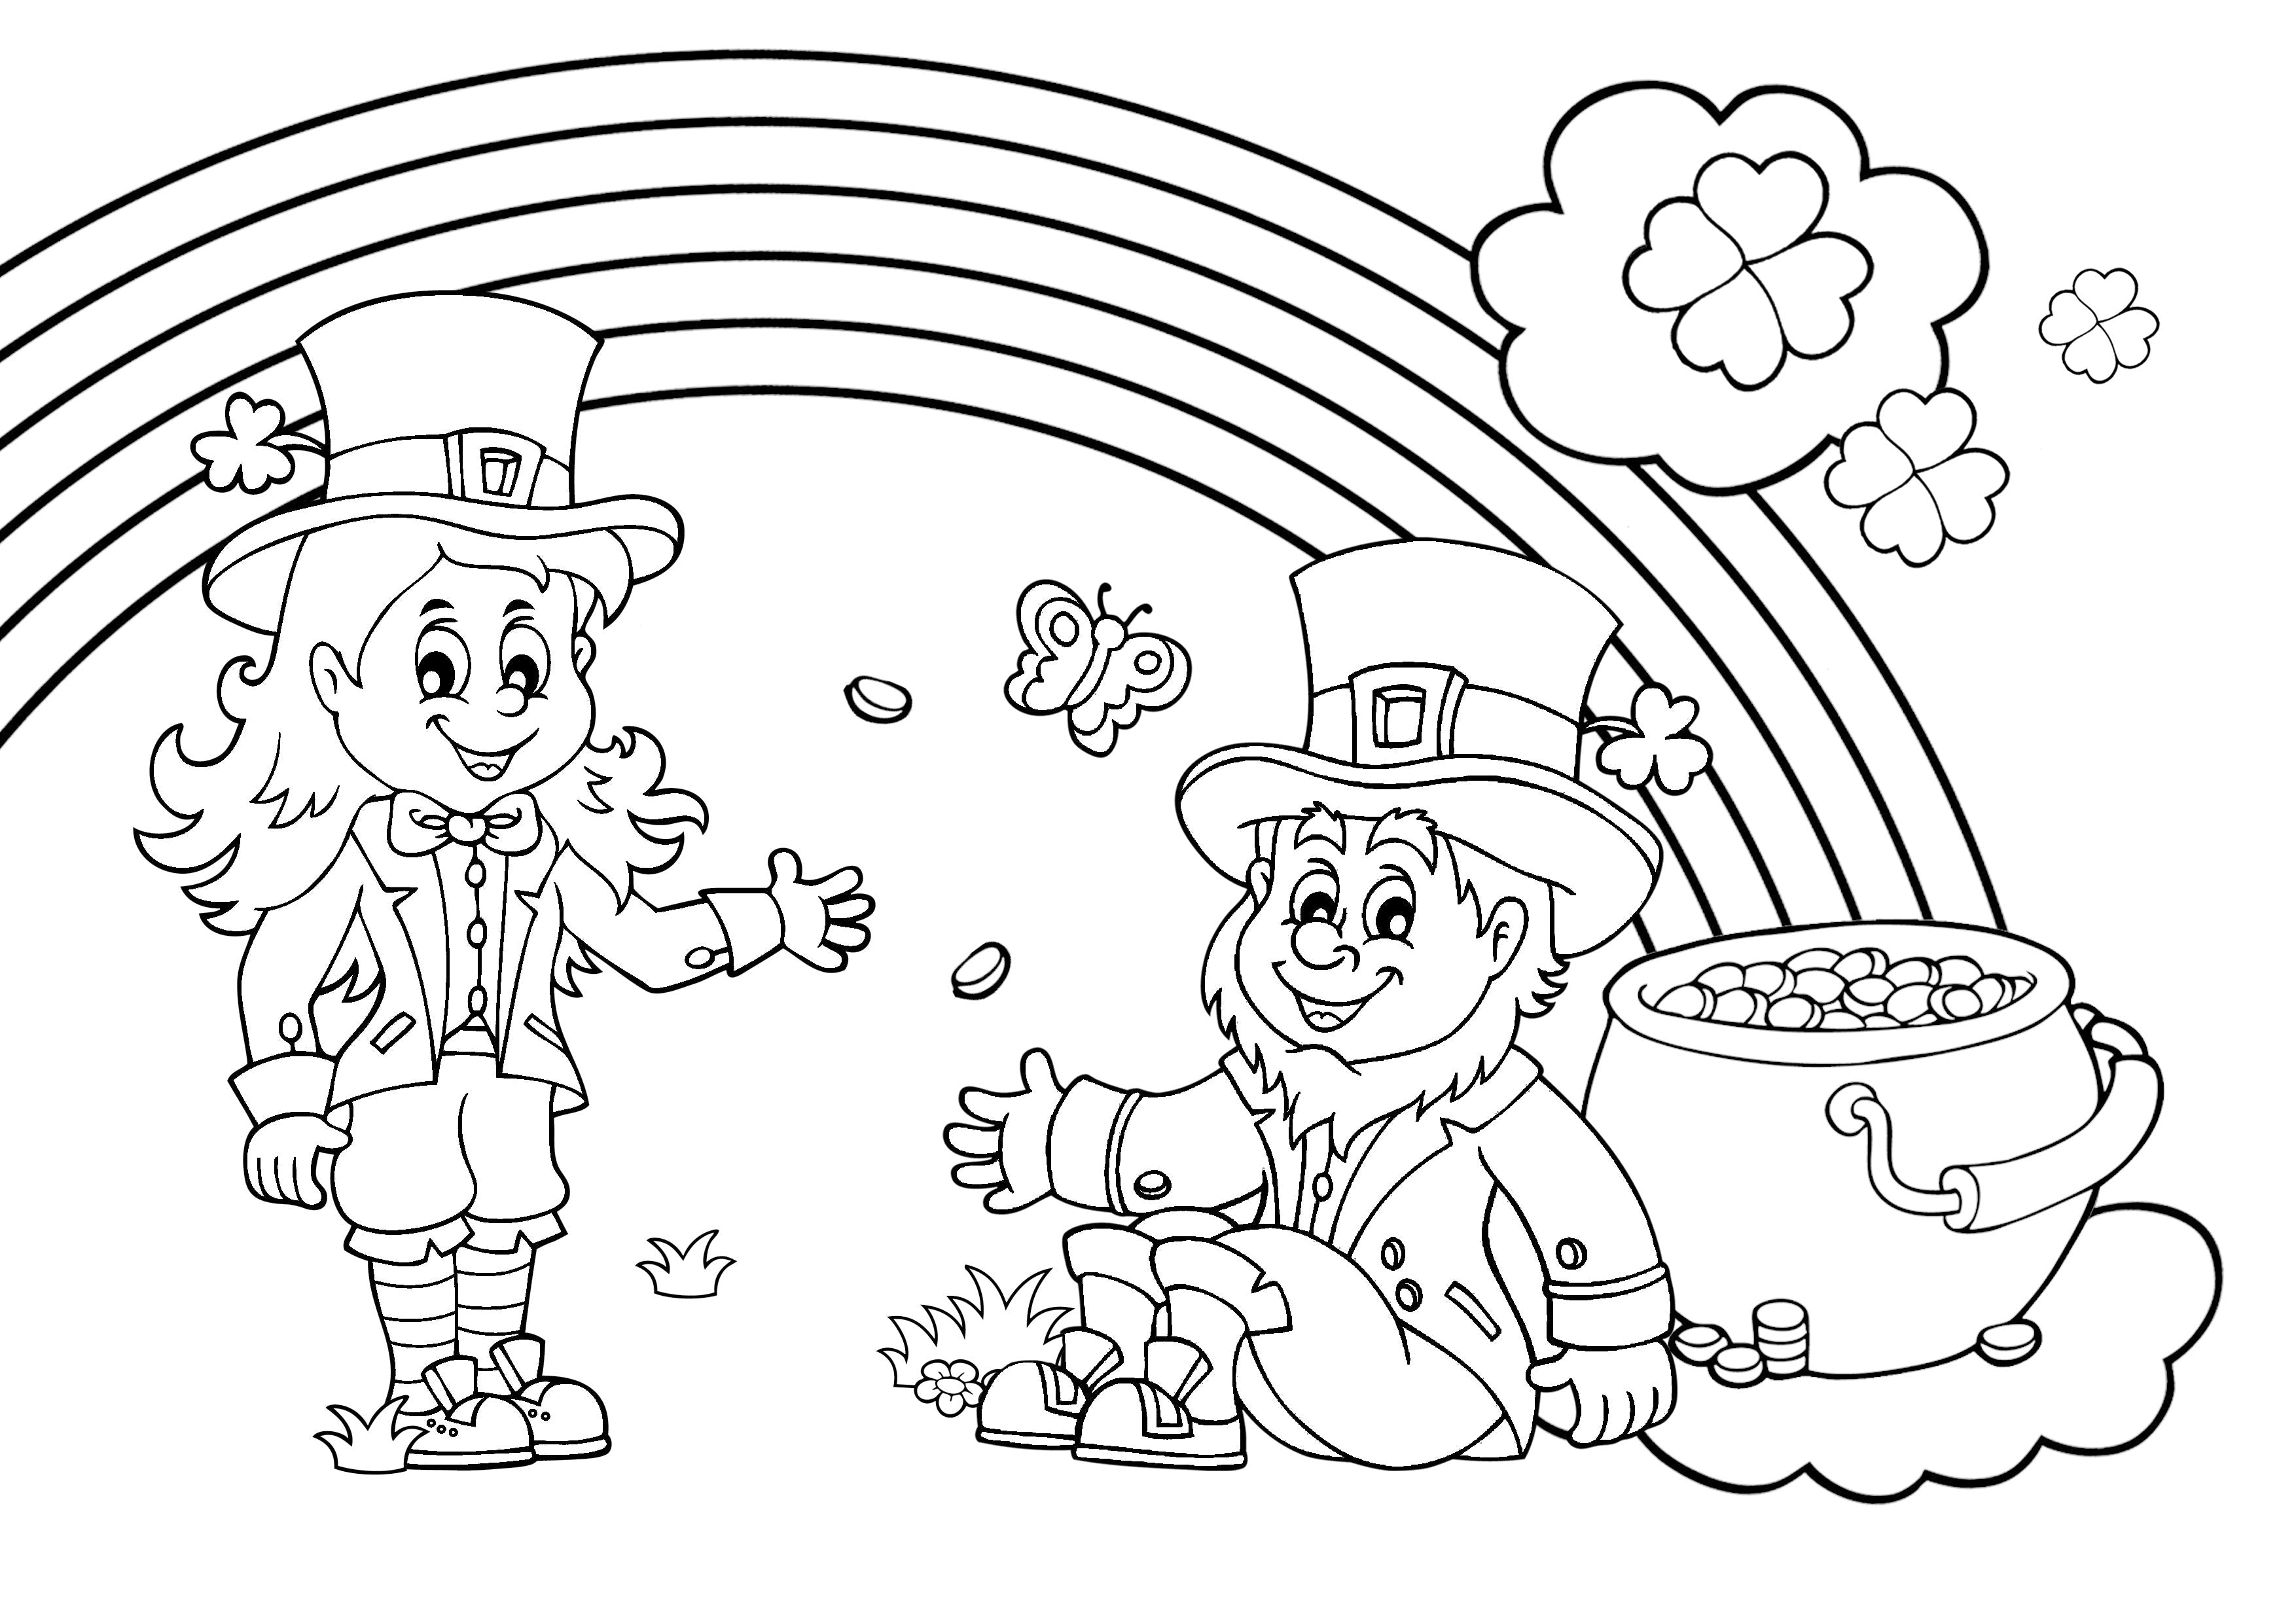 St Patrick's Day Colour In Activity Sheet by BookLife